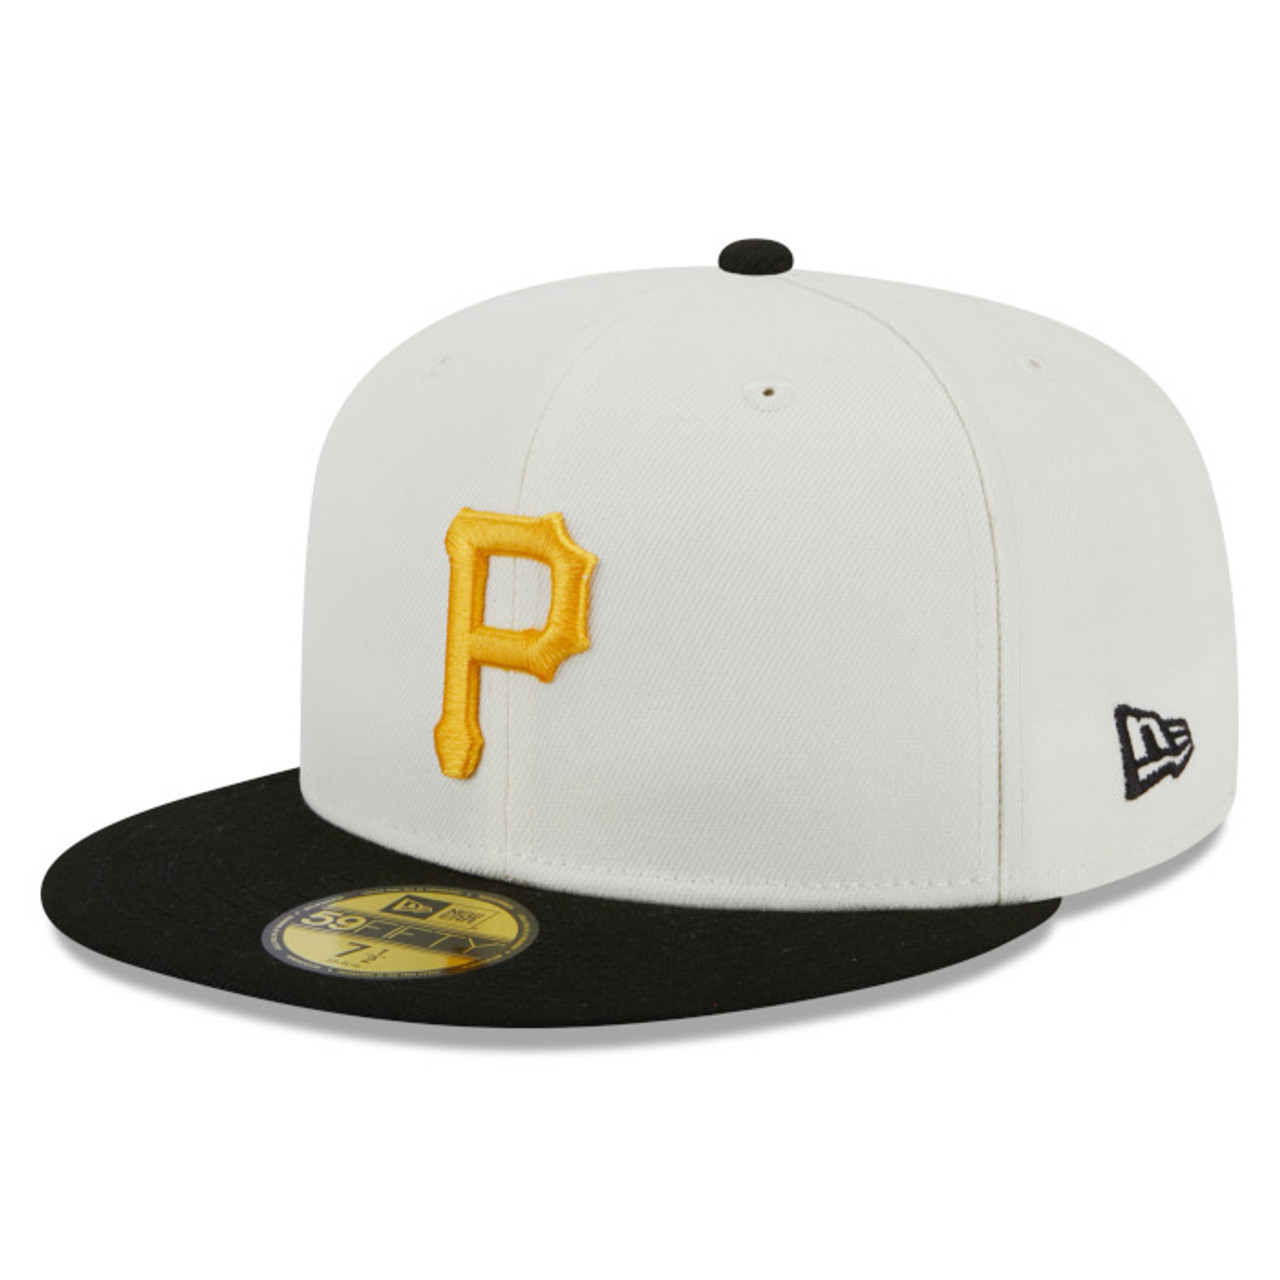 Men's New Era Pittsburgh Pirates Cooperstown Collection Retro